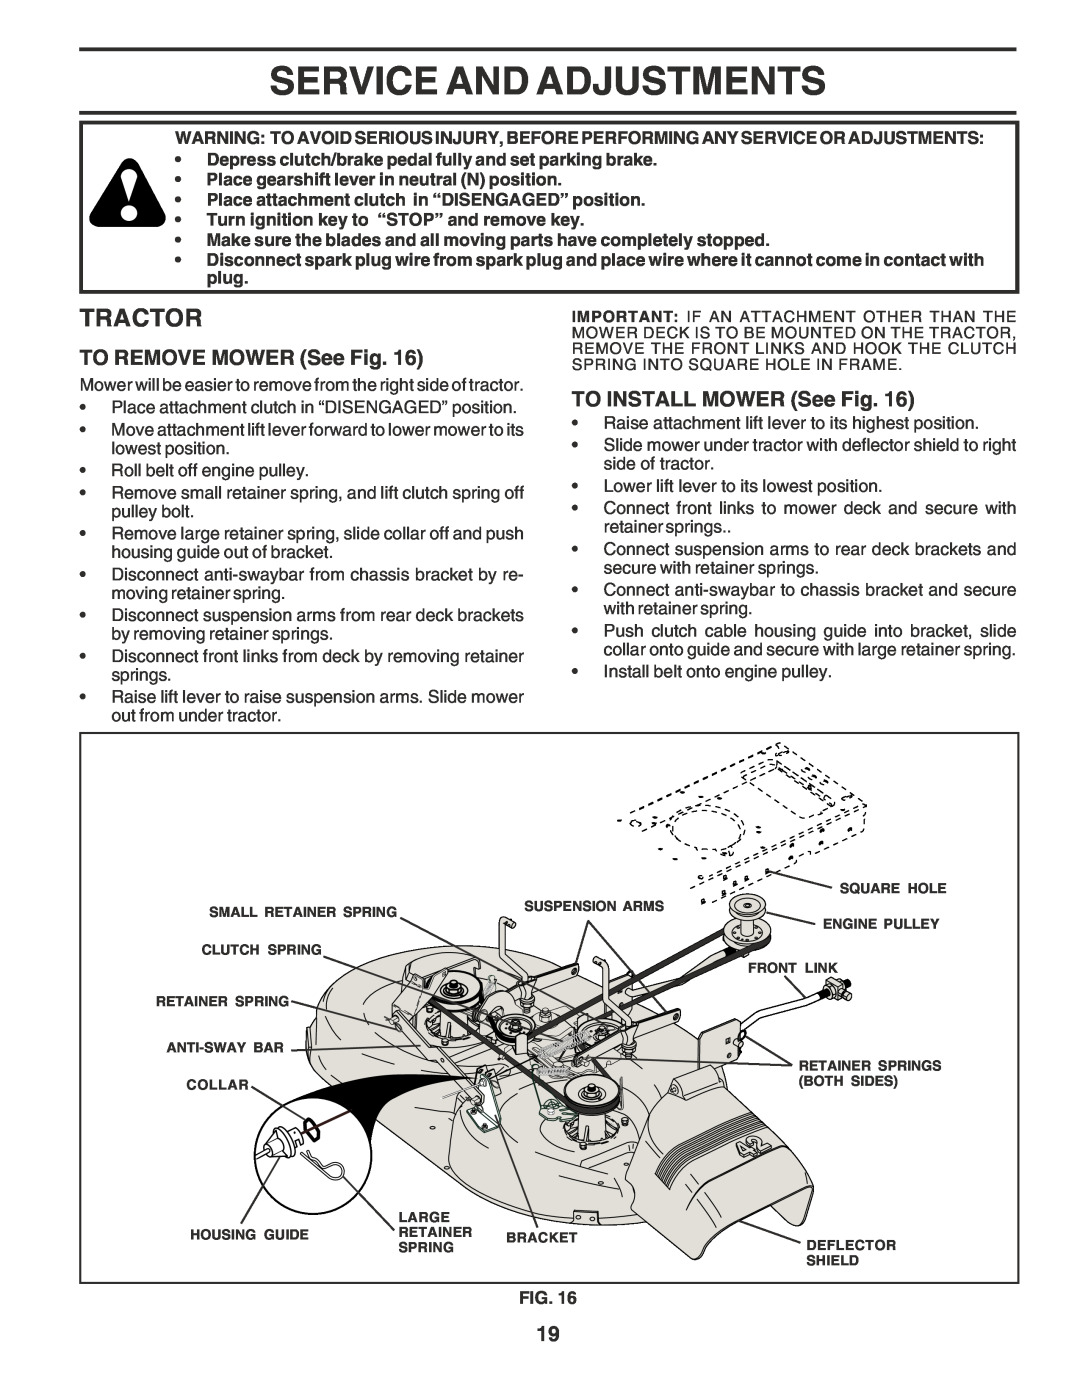 Poulan 183368 owner manual Service And Adjustments, TO REMOVE MOWER See Fig, TO INSTALL MOWER See Fig, Tractor 